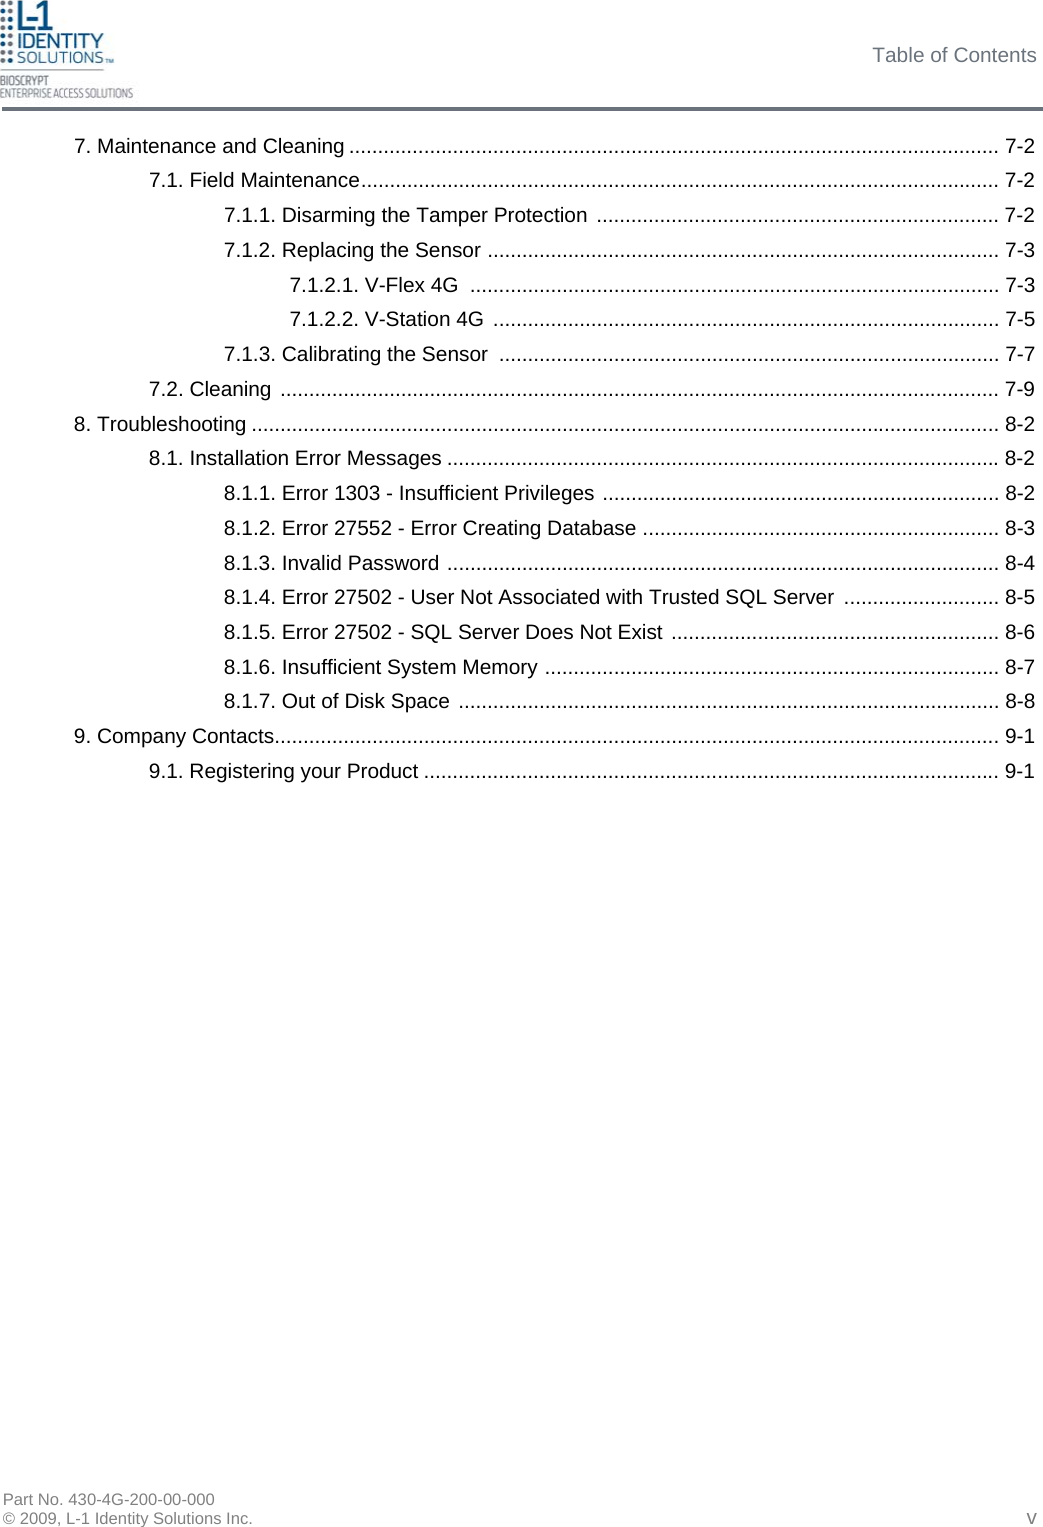 Table of Contents Part No. 430-4G-200-00-000 © 2009, L-1 Identity Solutions Inc. 7. Maintenance and Cleaning ................................................................................................................. 7-2 7.1. Field Maintenance............................................................................................................... 7-2 7.1.1. Disarming the Tamper Protection ...................................................................... 7-2 7.1.2. Replacing the Sensor ......................................................................................... 7-3 7.1.2.1. V-Flex 4G  ............................................................................................ 7-3 7.1.2.2. V-Station 4G ........................................................................................ 7-5 7.1.3. Calibrating the Sensor ....................................................................................... 7-7 7.2. Cleaning ............................................................................................................................. 7-9 8. Troubleshooting .................................................................................................................................. 8-2 8.1. Installation Error Messages ................................................................................................ 8-2 8.1.1. Error 1303 - Insufficient Privileges ..................................................................... 8-2 8.1.2. Error 27552 - Error Creating Database .............................................................. 8-3 8.1.3. Invalid Password ................................................................................................ 8-4 8.1.4. Error 27502 - User Not Associated with Trusted SQL Server  ........................... 8-5 8.1.5. Error 27502 - SQL Server Does Not Exist ......................................................... 8-6 8.1.6. Insufficient System Memory ............................................................................... 8-7 8.1.7. Out of Disk Space .............................................................................................. 8-8 9. Company Contacts.............................................................................................................................. 9-1 9.1. Registering your Product .................................................................................................... 9-1   v 